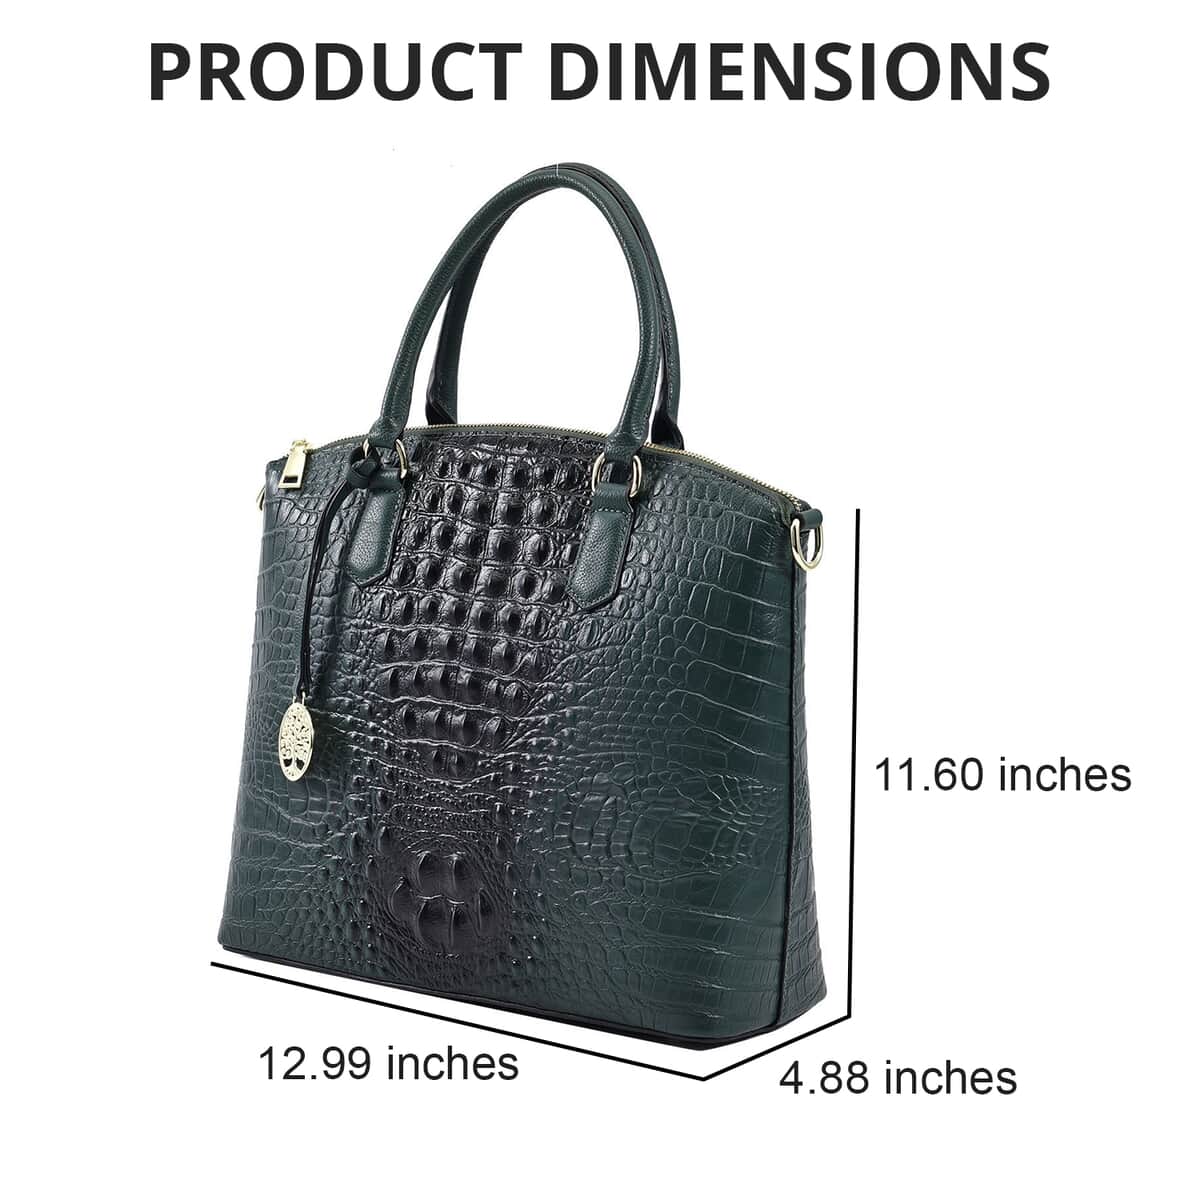 THE MONACO Dark Green with Black Croco Embossed Genuine Leather Tote Bag (12.99"x4.88"x11.6") with Handle Drop and Detachable Long Strap image number 4